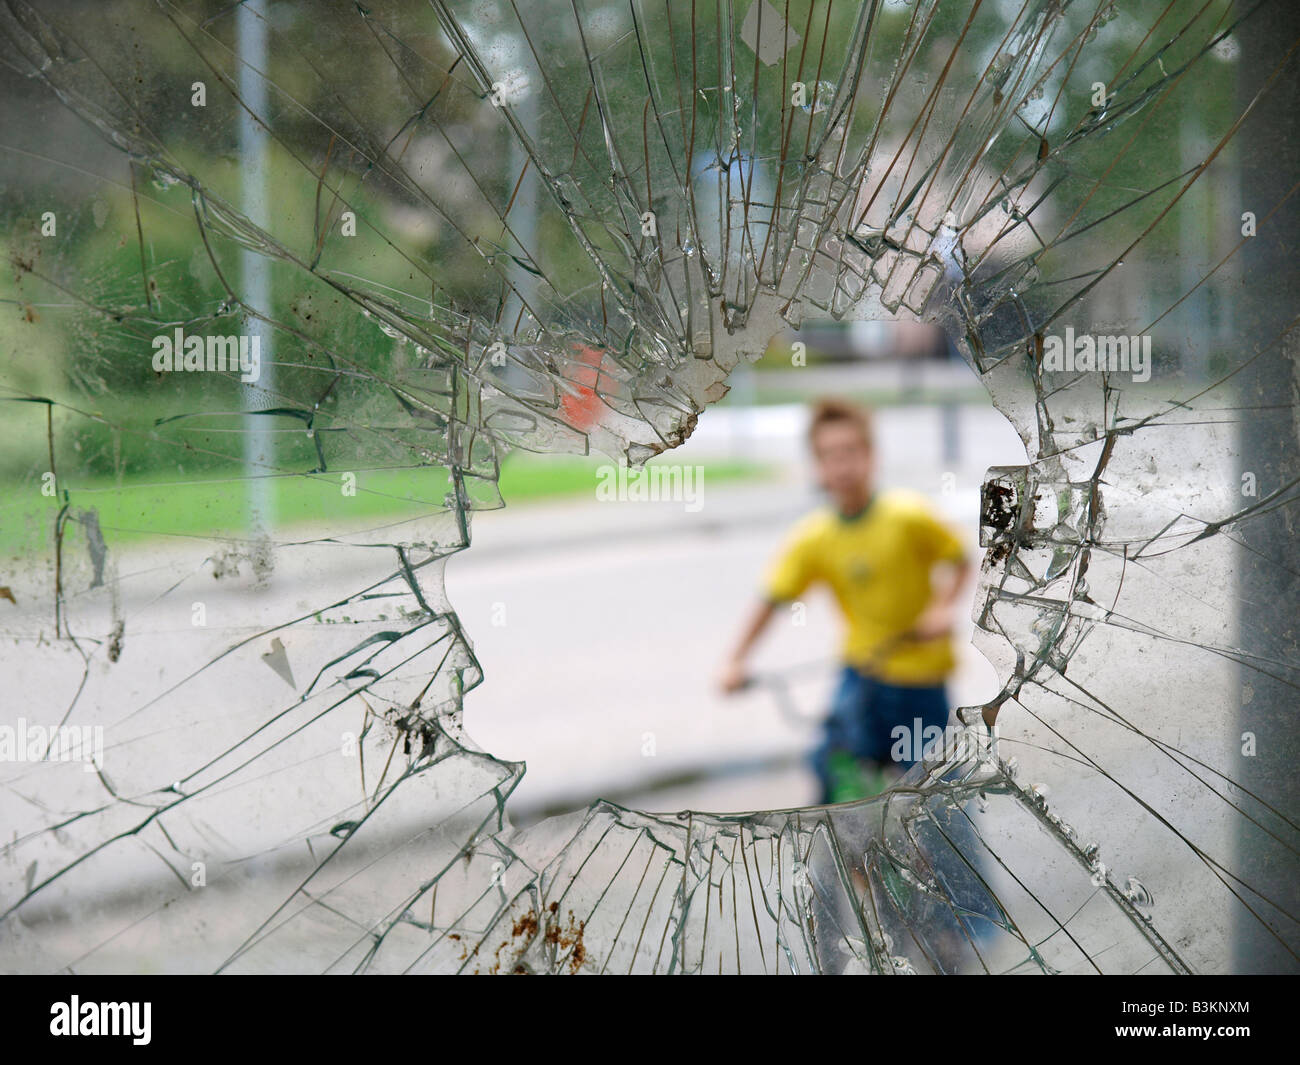 Broken window with blurred boy on bicycle behind it vandalism hole Stock Photo